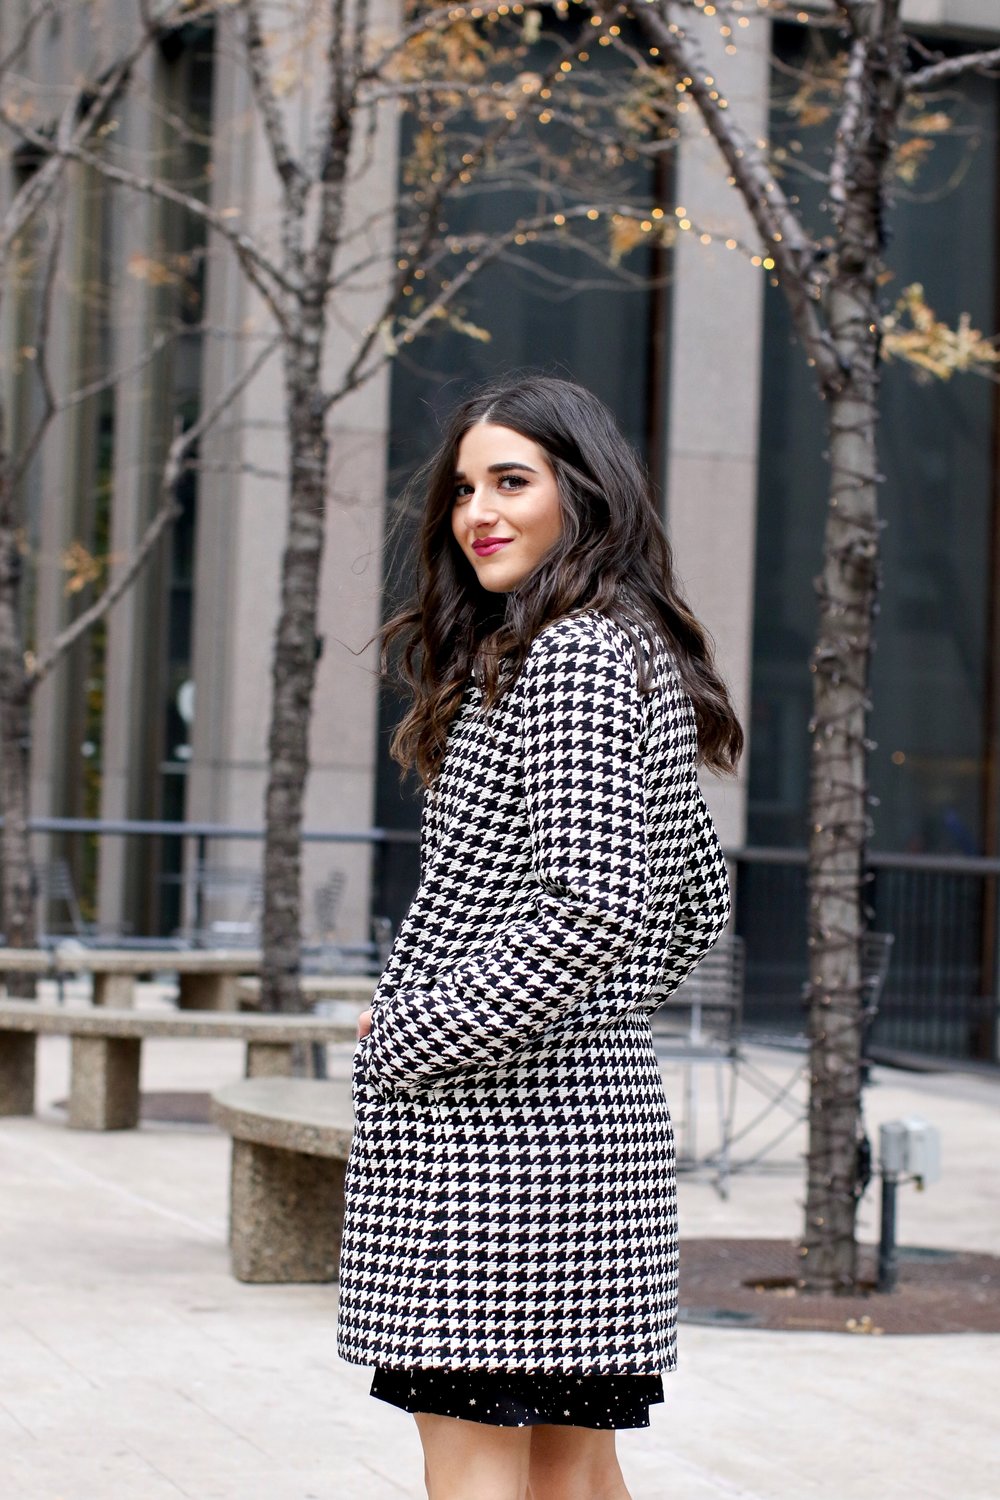 Houndstooth Coat + White Booties // The Pros And Cons Of Freelancing